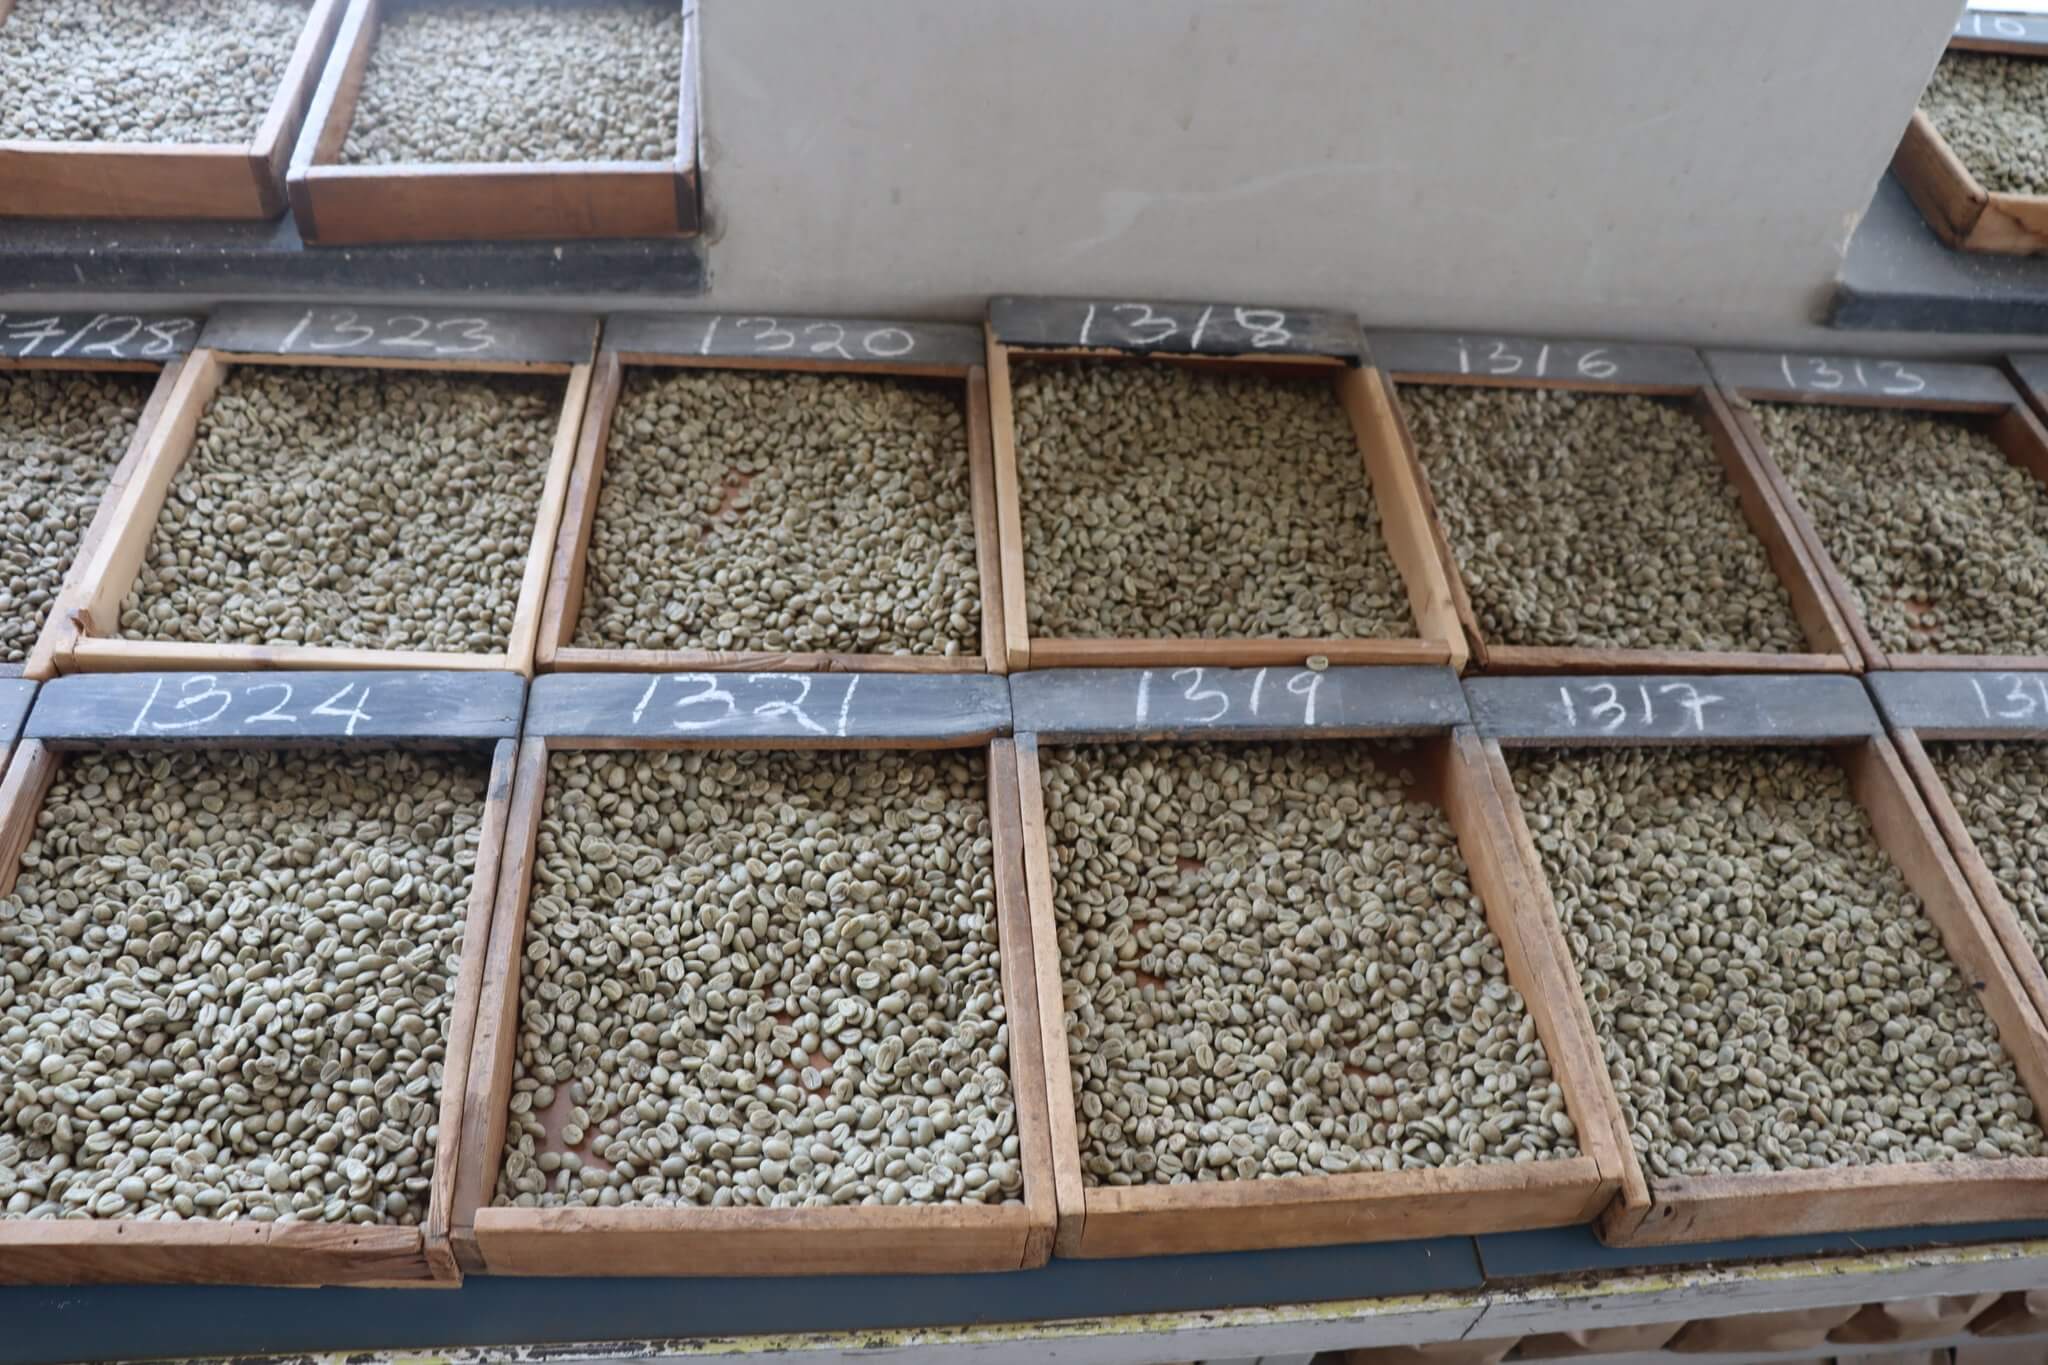 Coffee Auction Sees 62pc Sales Surge Amid Price Dip, Fueled by Strong Volumes